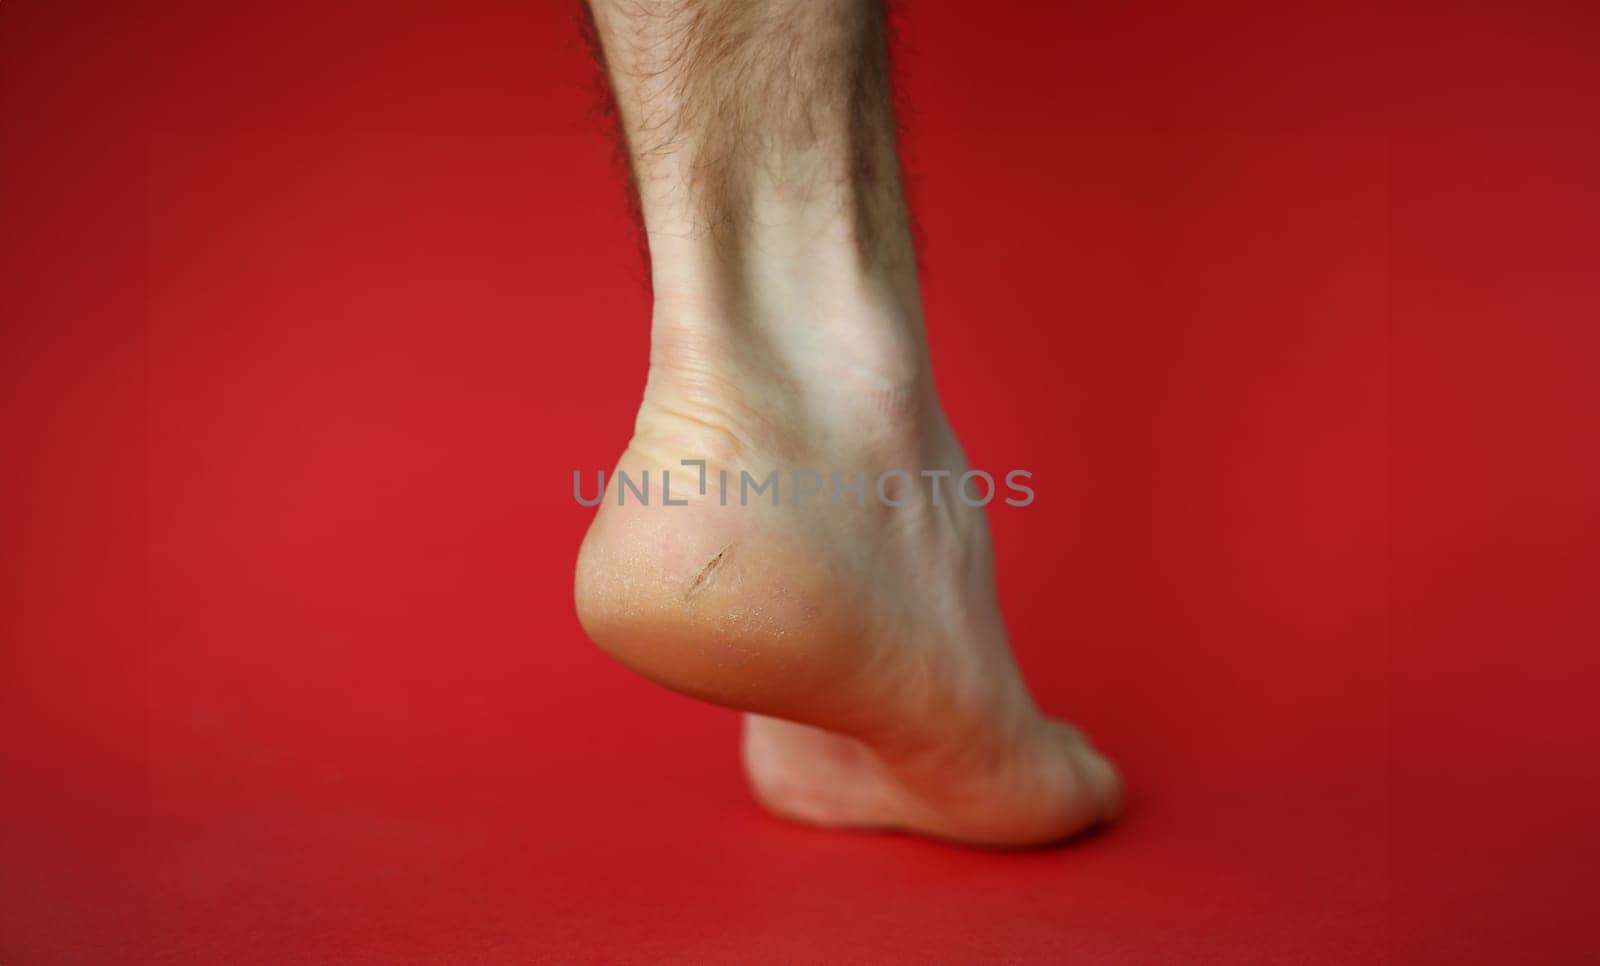 Close-up of heel of foot with bad skin covered with cracks. Female gam exposed to camera on lower view angle. Moisturizing cream advertisement concept. Isolated on red background